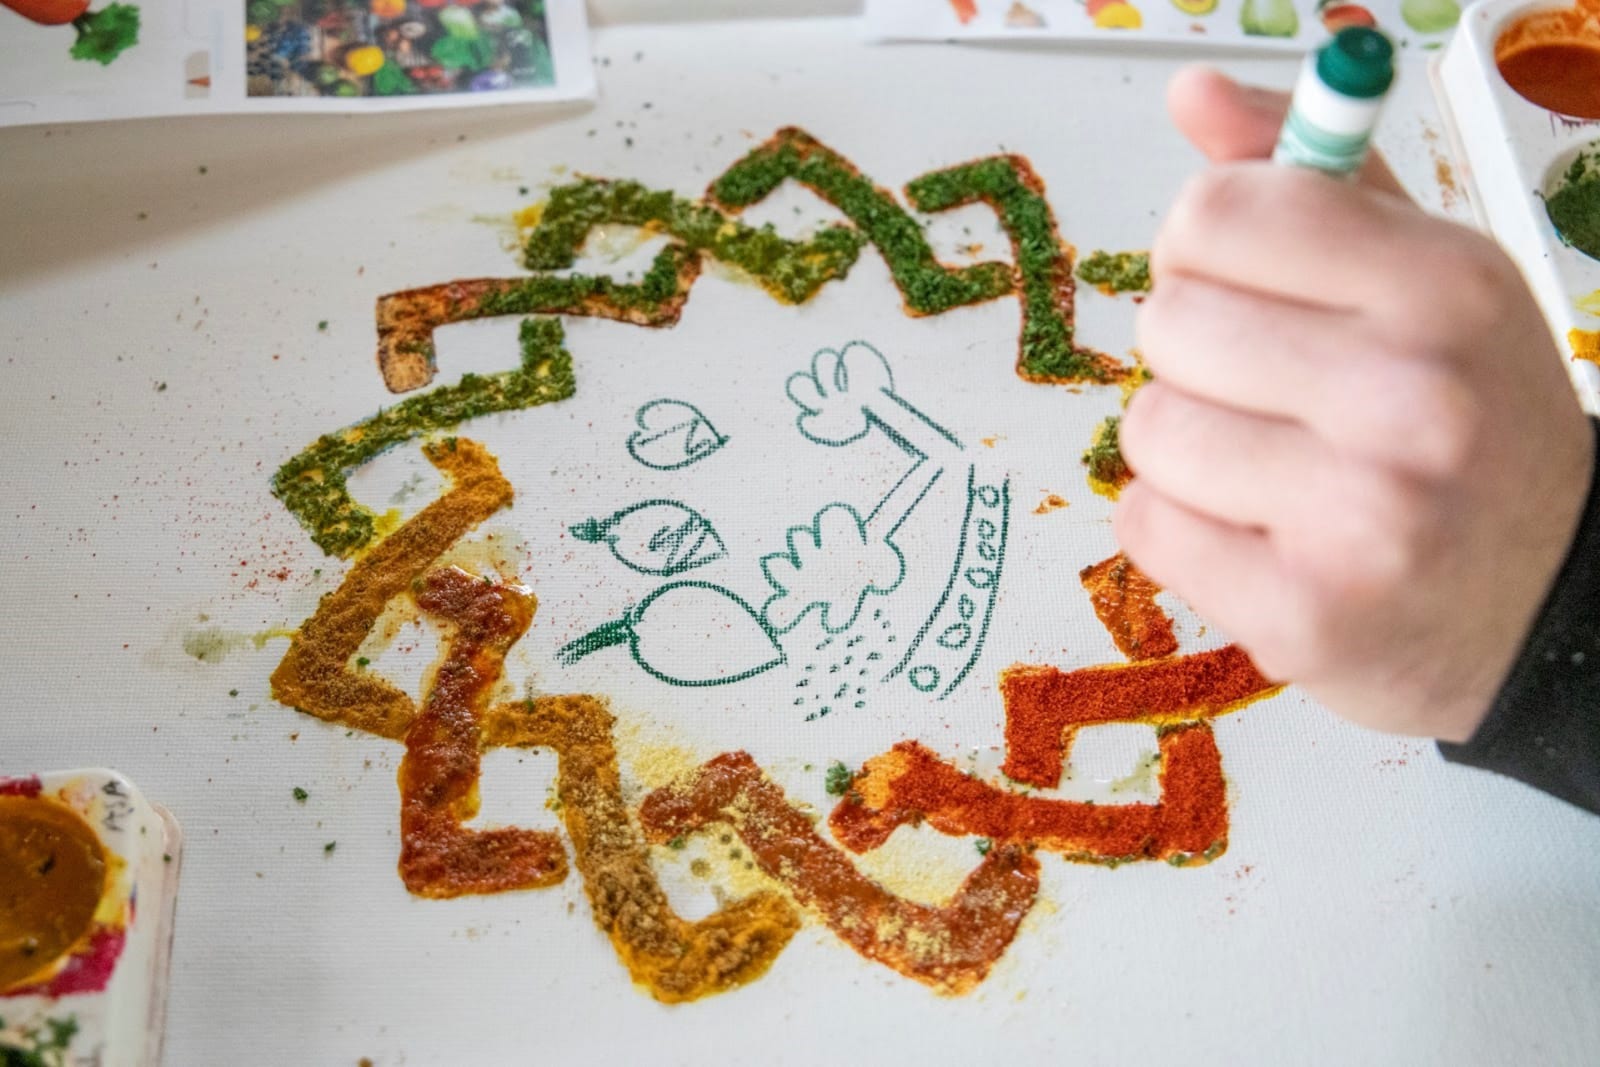 A hand clutching a green crayon is drawing on canas. The canvas showe a pattern created by sticking different spices together. 